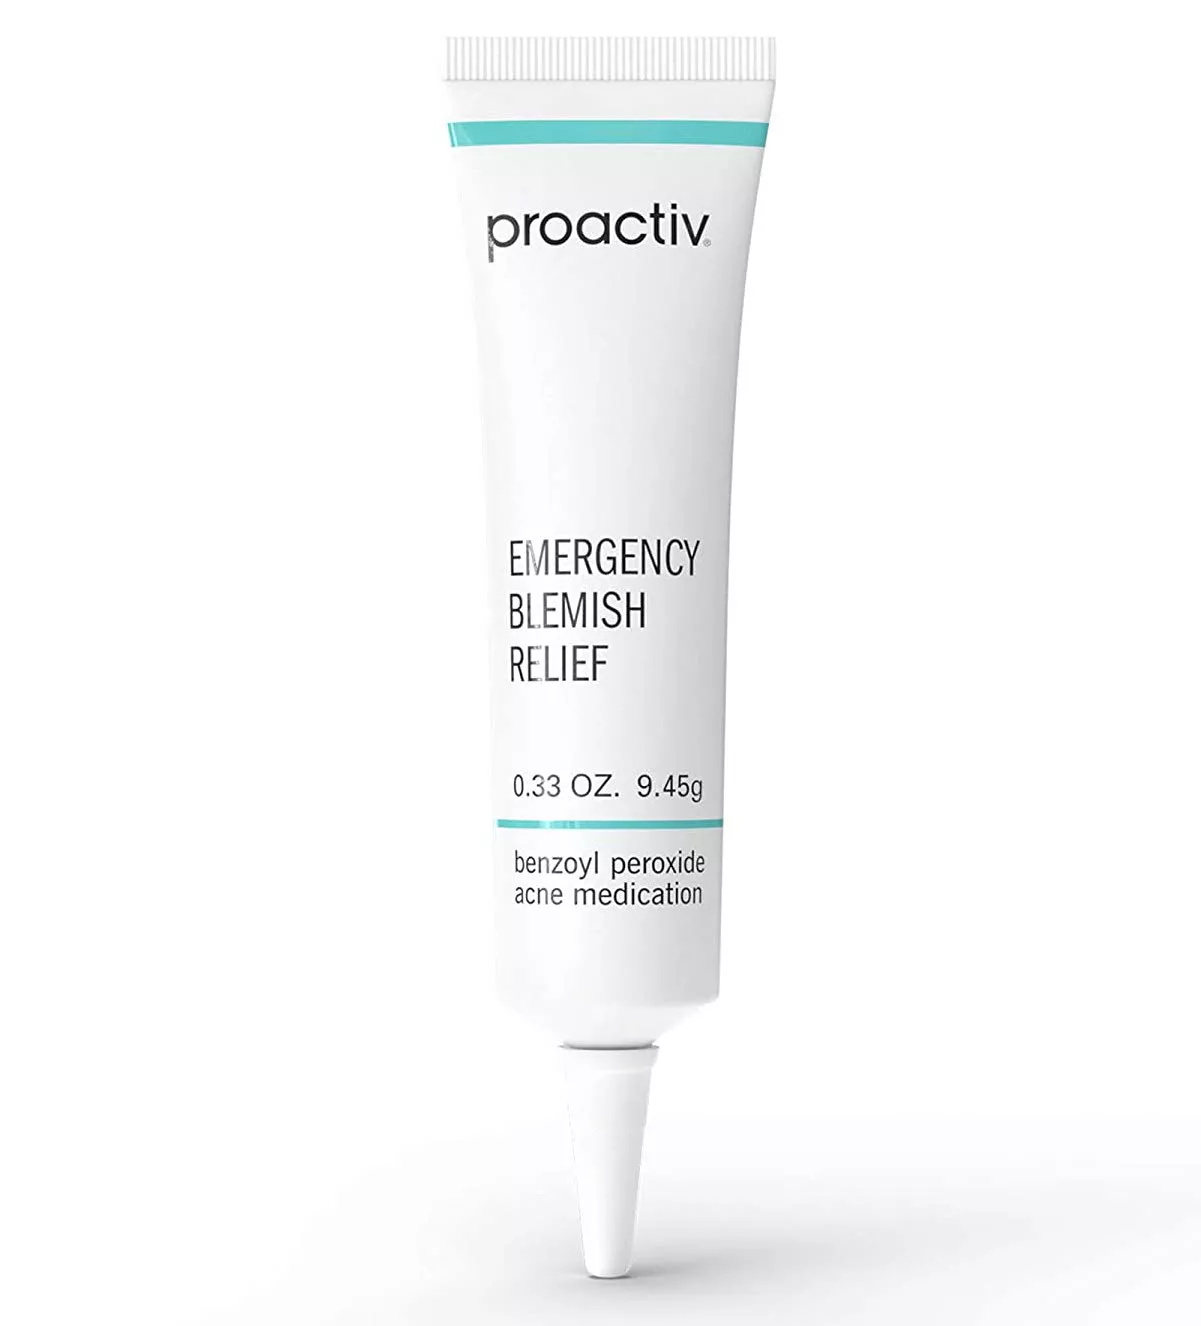 The Best With Benzoyl Peroxide Acne Treatments: Proactiv Emergency Blemish Relief